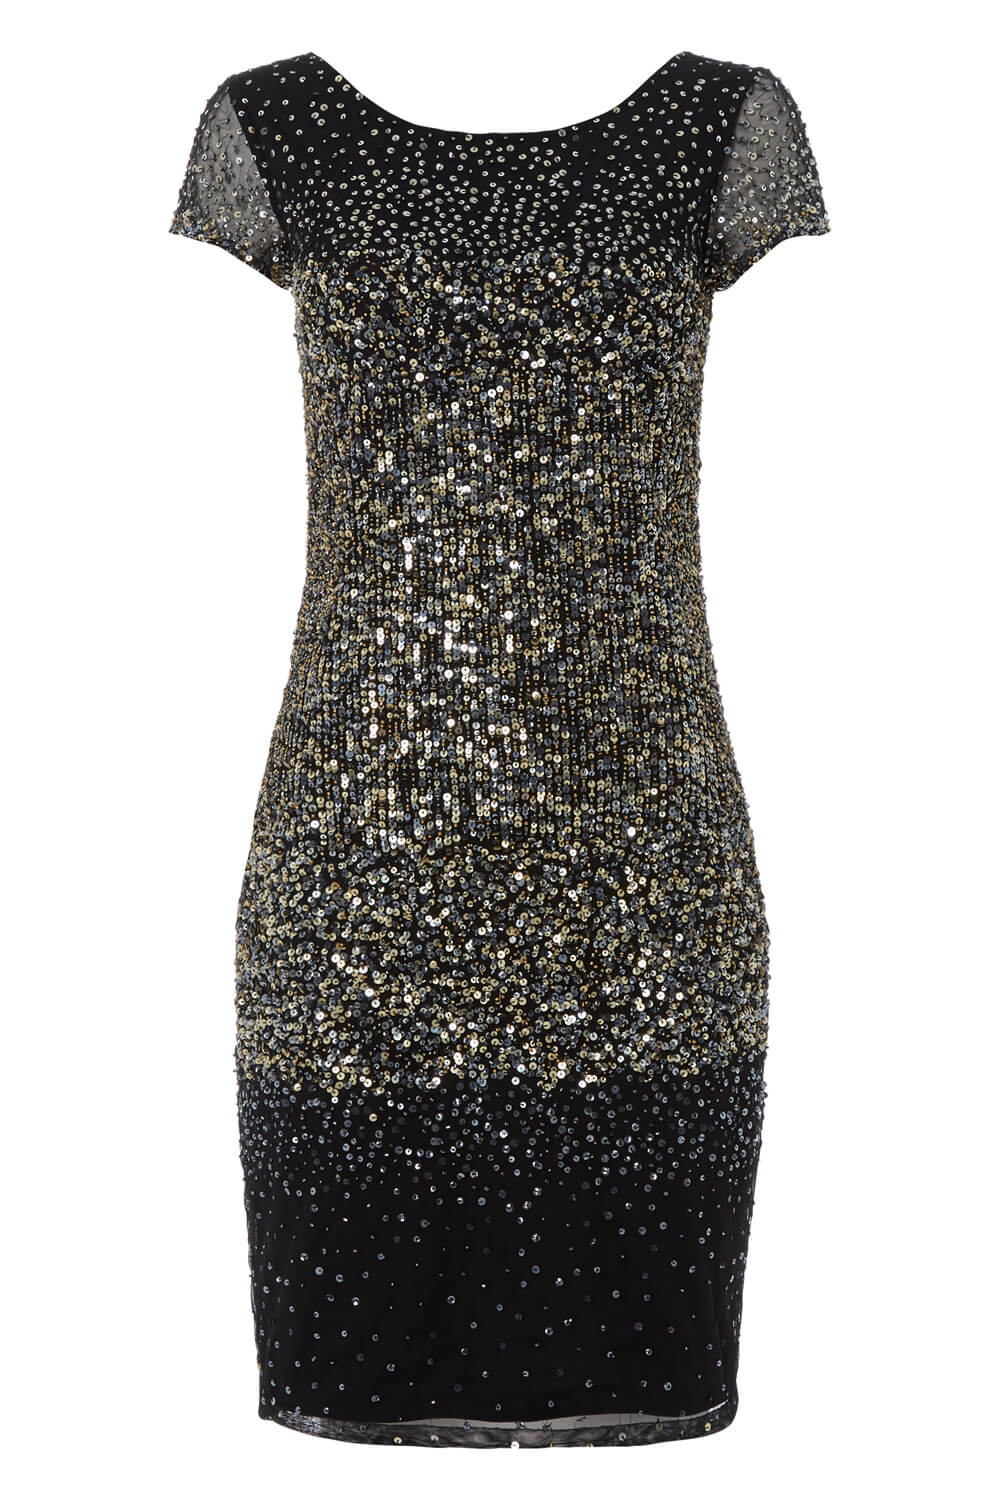 PEWTER Ombre Sequin Dress, Image 4 of 4